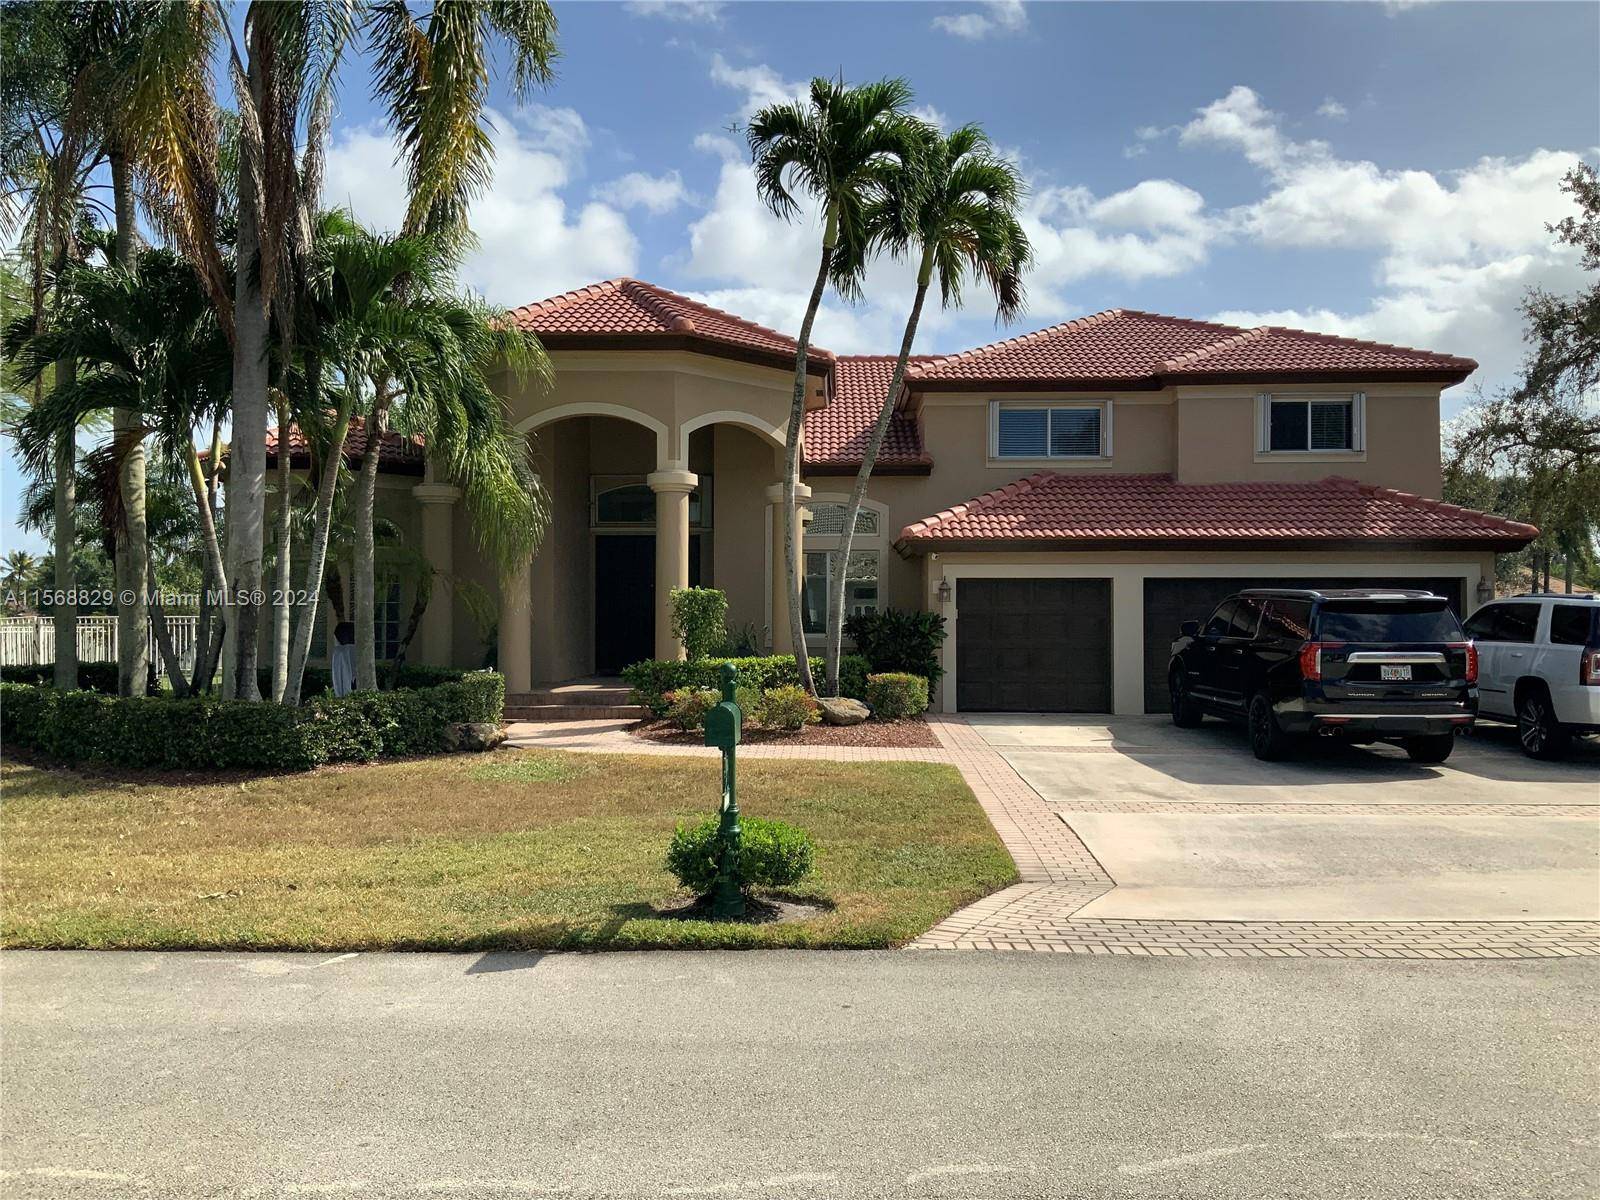 Resort lifestyle Impeccable beautiful 5 Bedroom, 1 Den, 3 full bathroom home in Davie sitting on a builders acre.